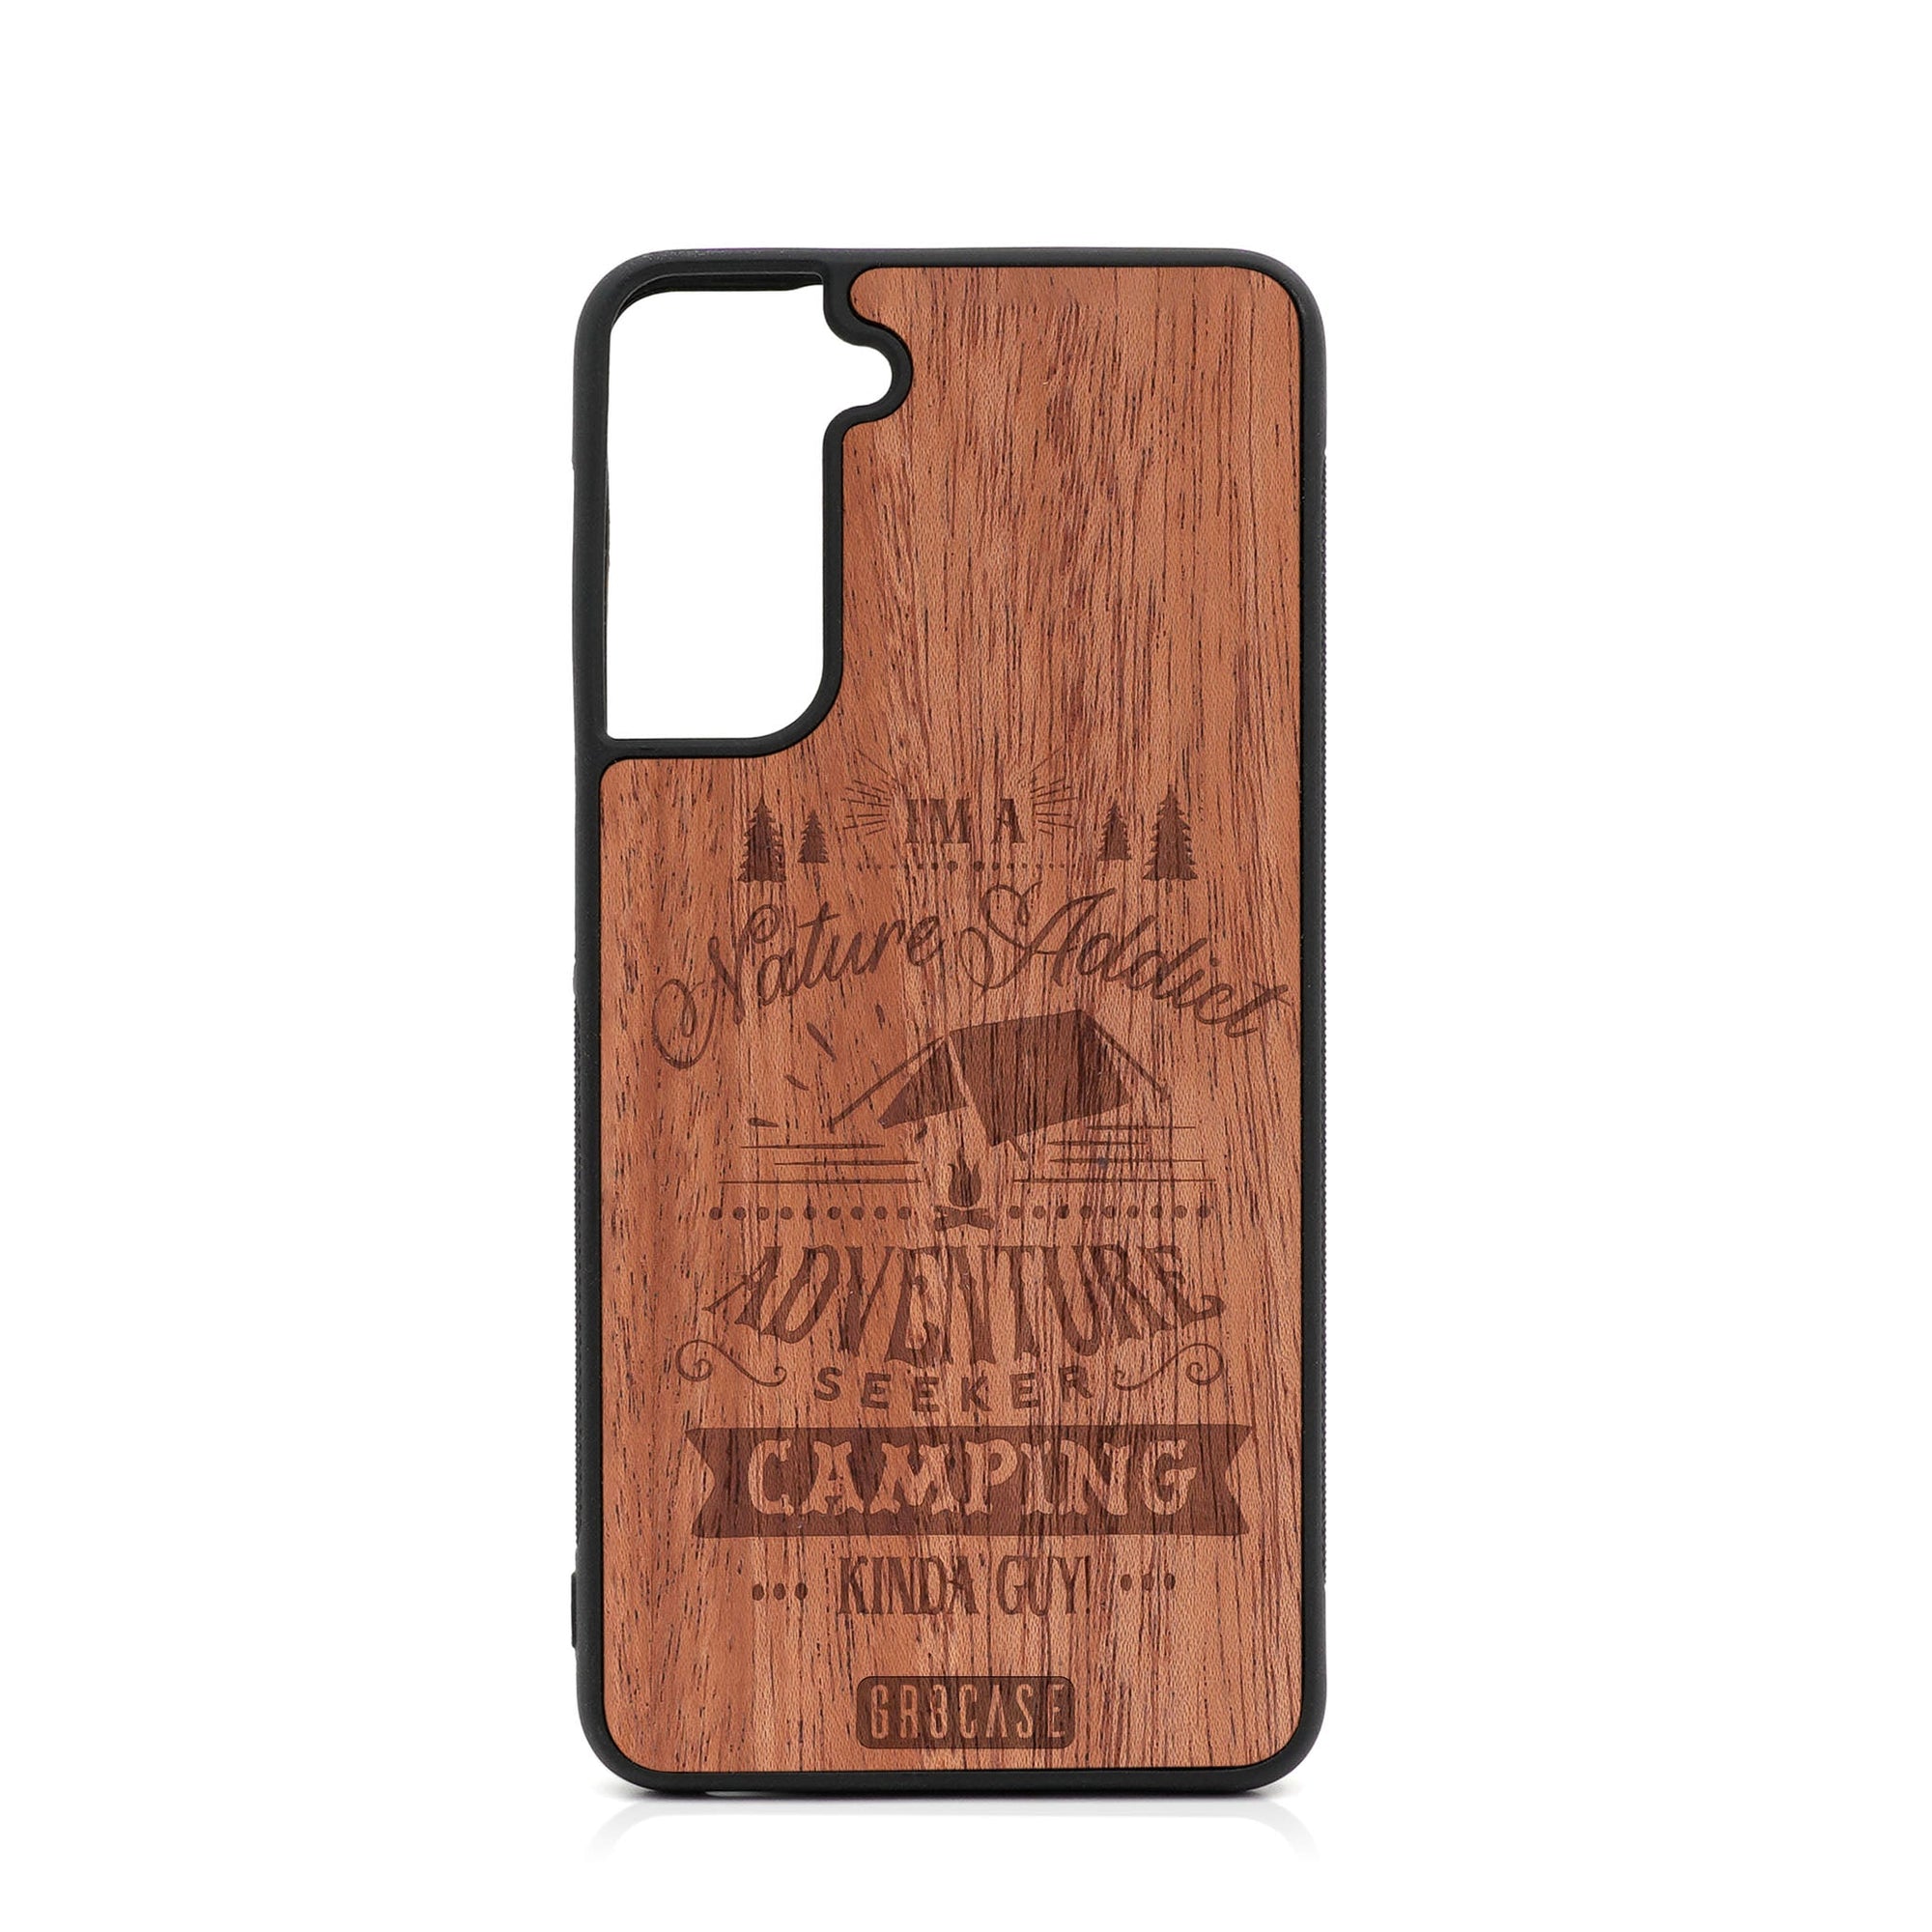 I'm A Nature Addict Adventure Seeker Camping Kinda Guy Design Wood Case For Samsung Galaxy S22 Plus